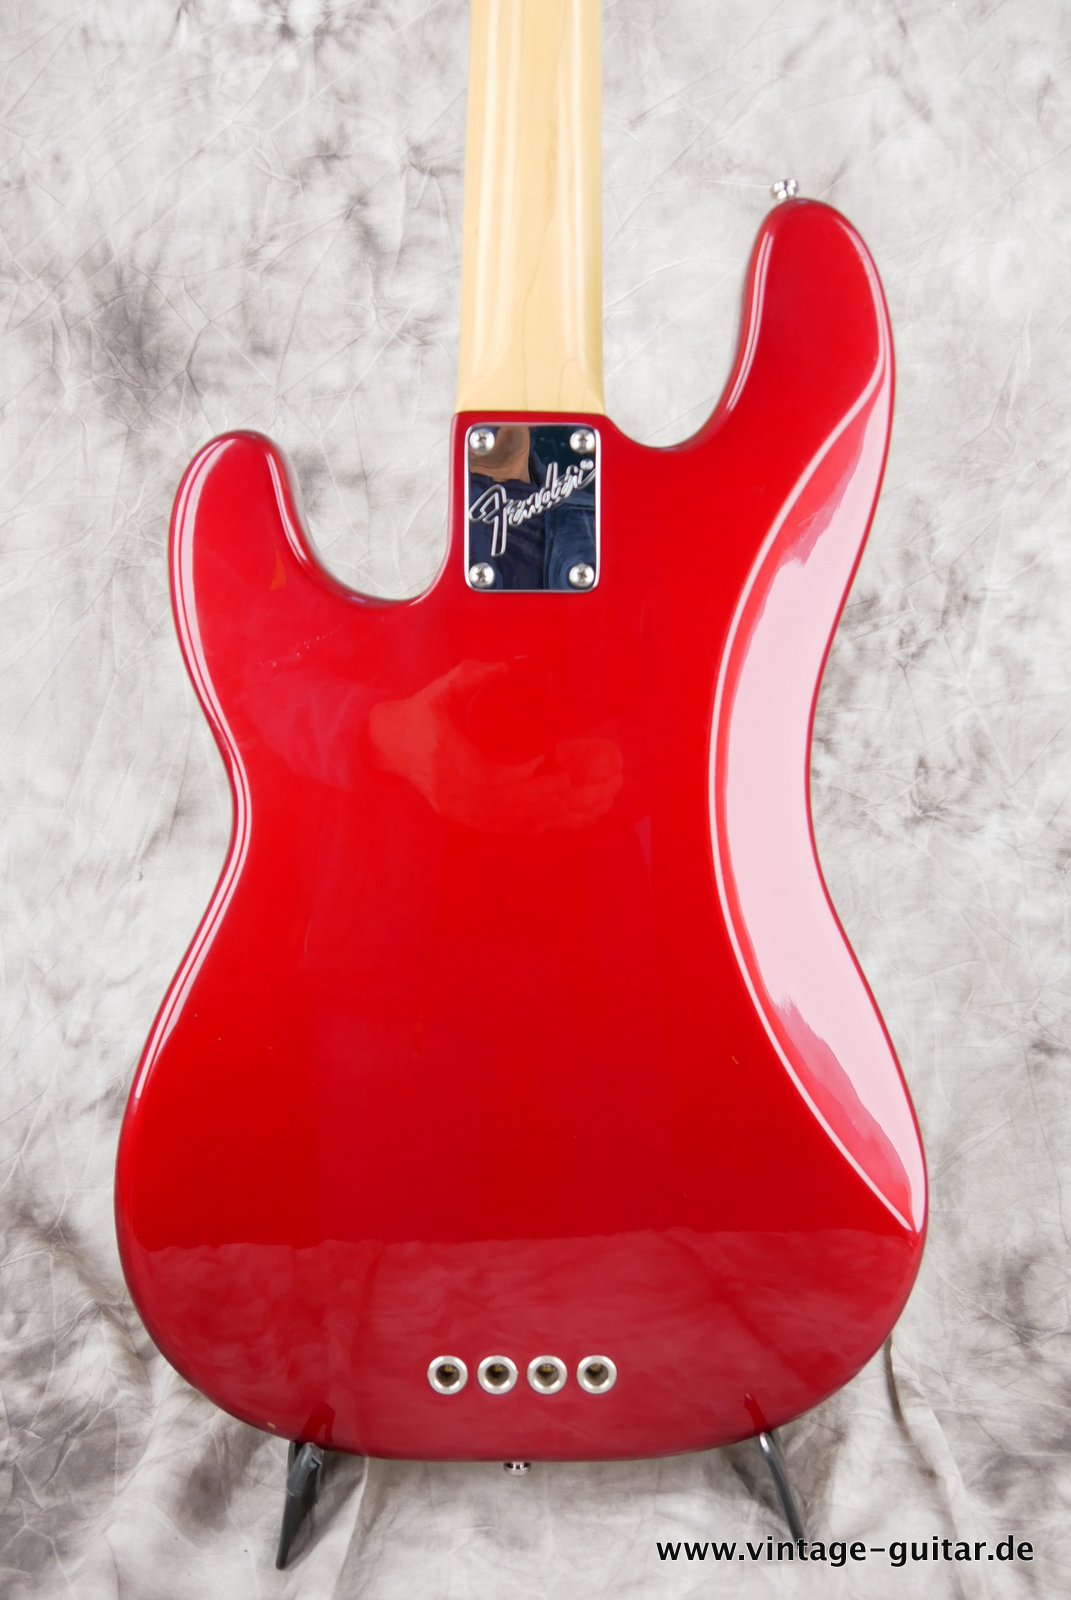 Fender-Precision-Bass-1994-candy-apple-red-004.JPG